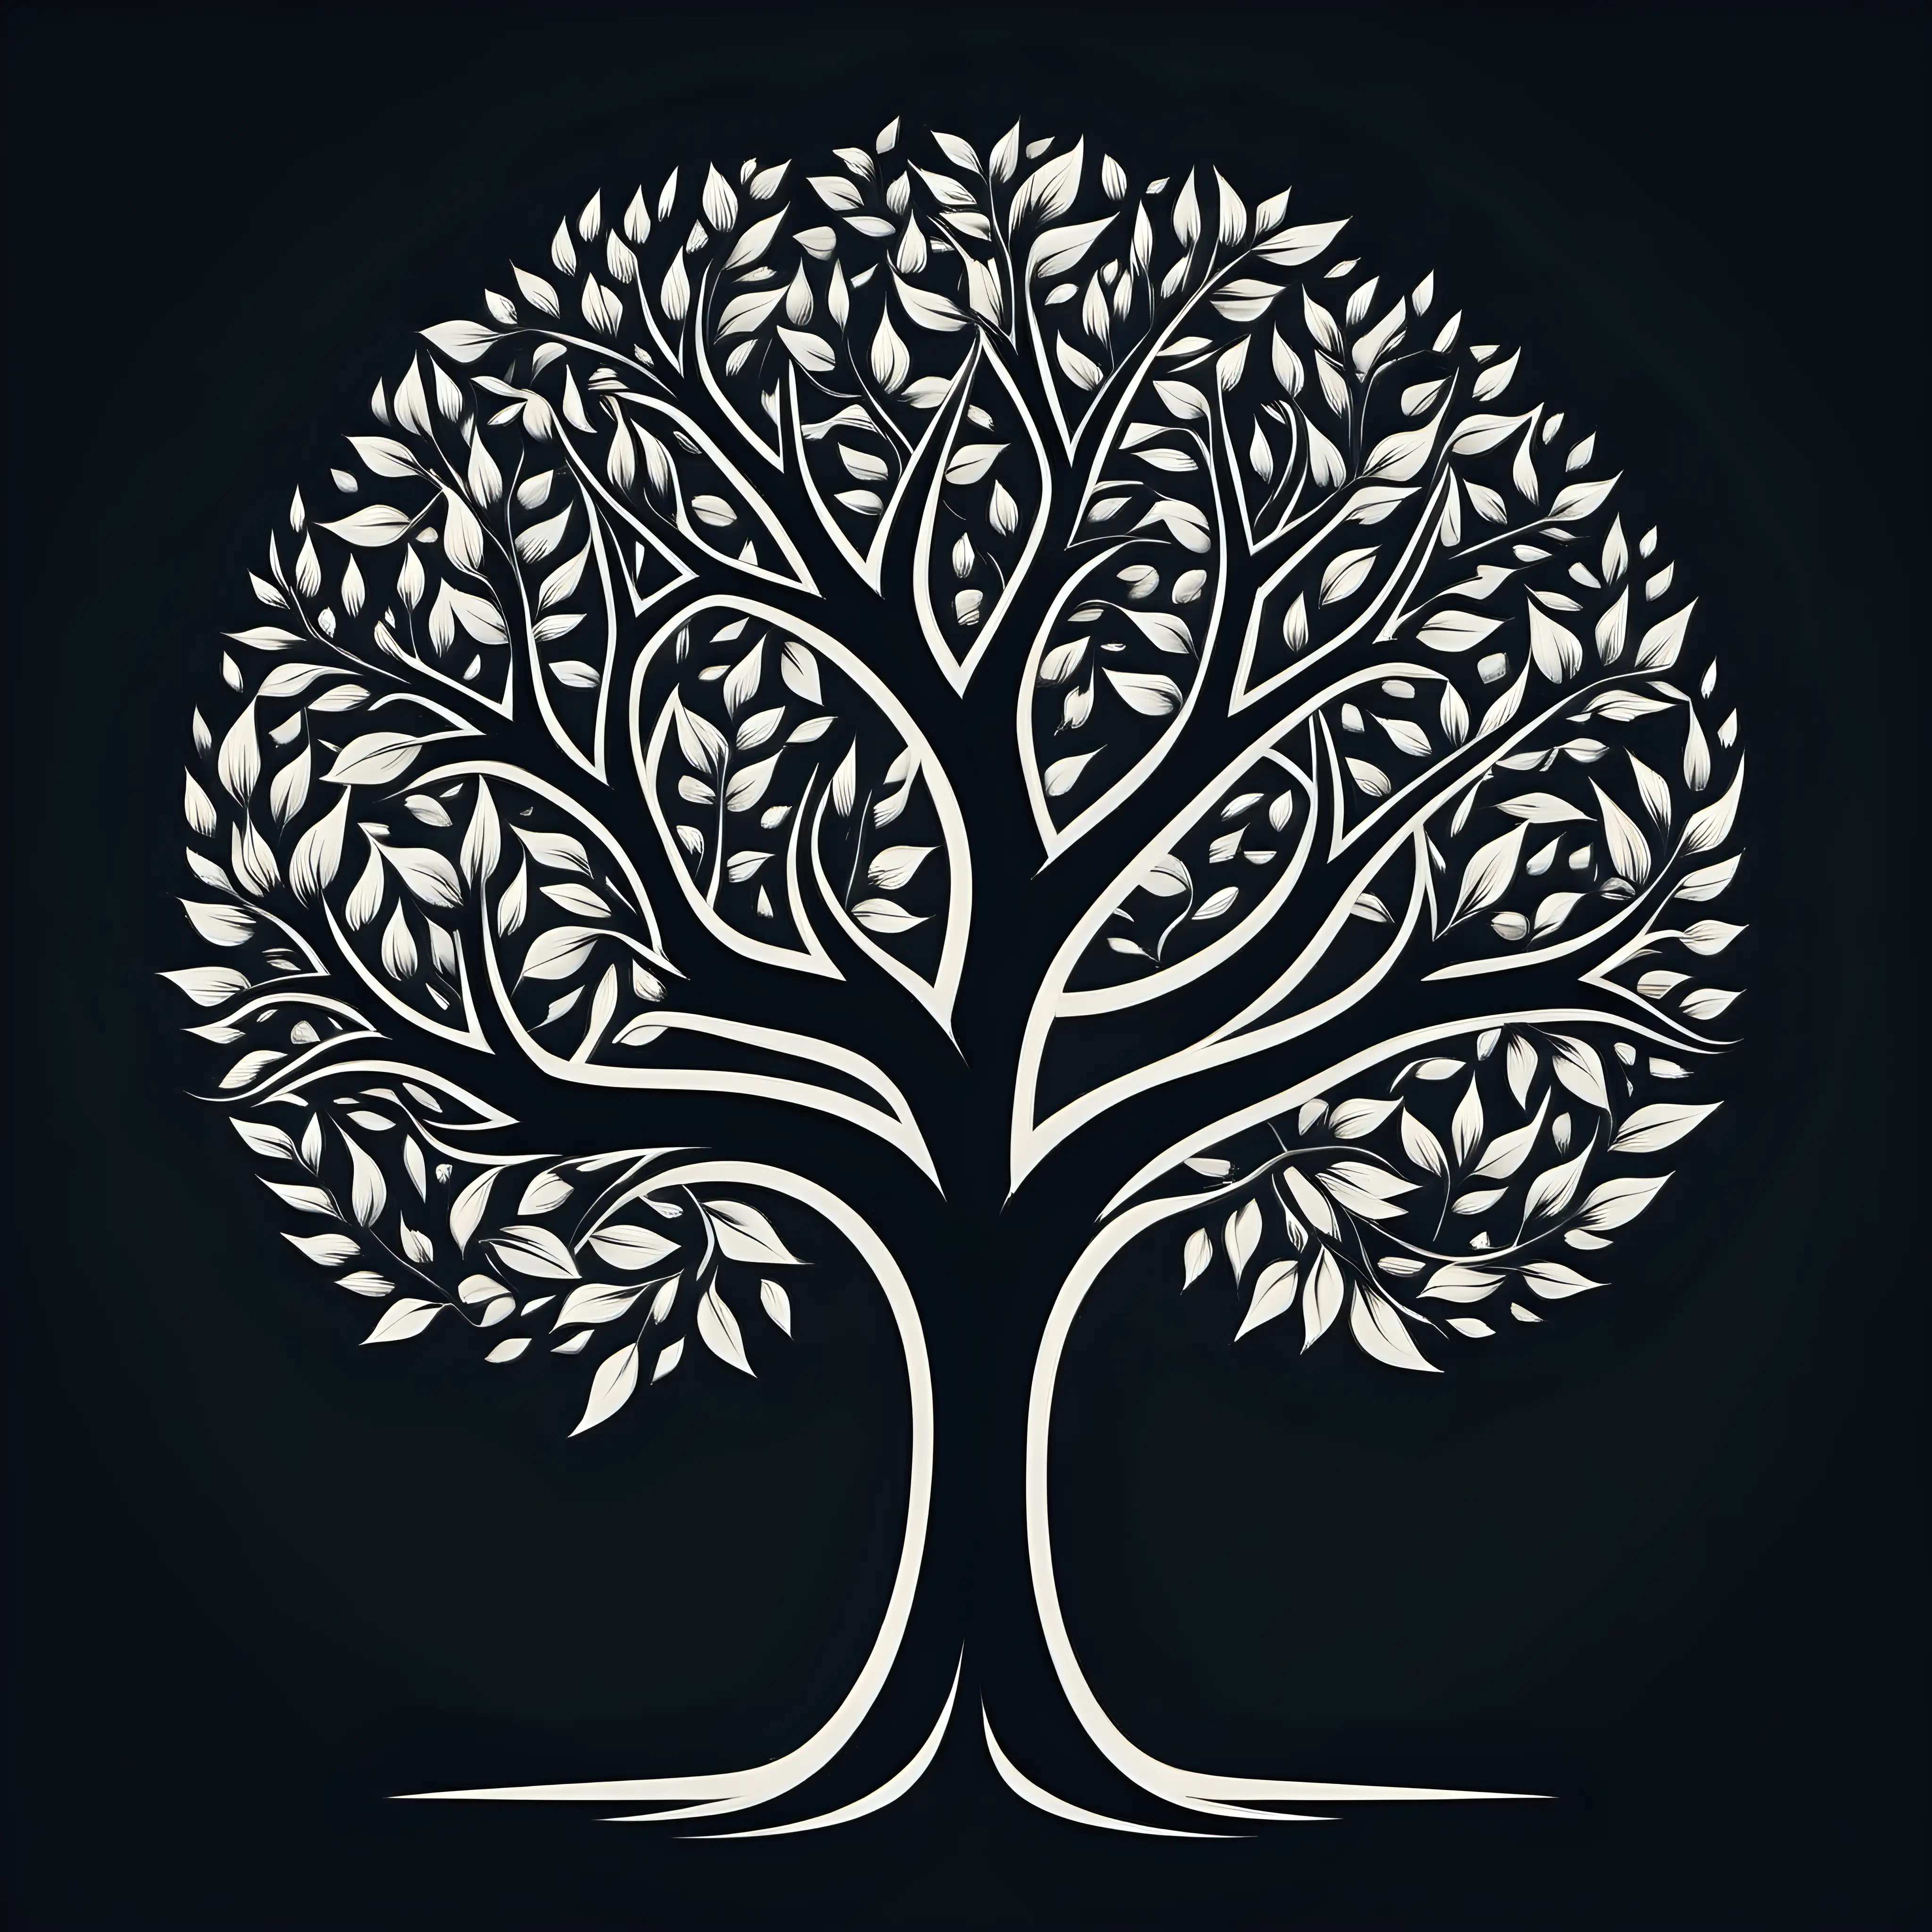 black graphic tree with leaves. use solid black color for tree with no textures or gradients. 